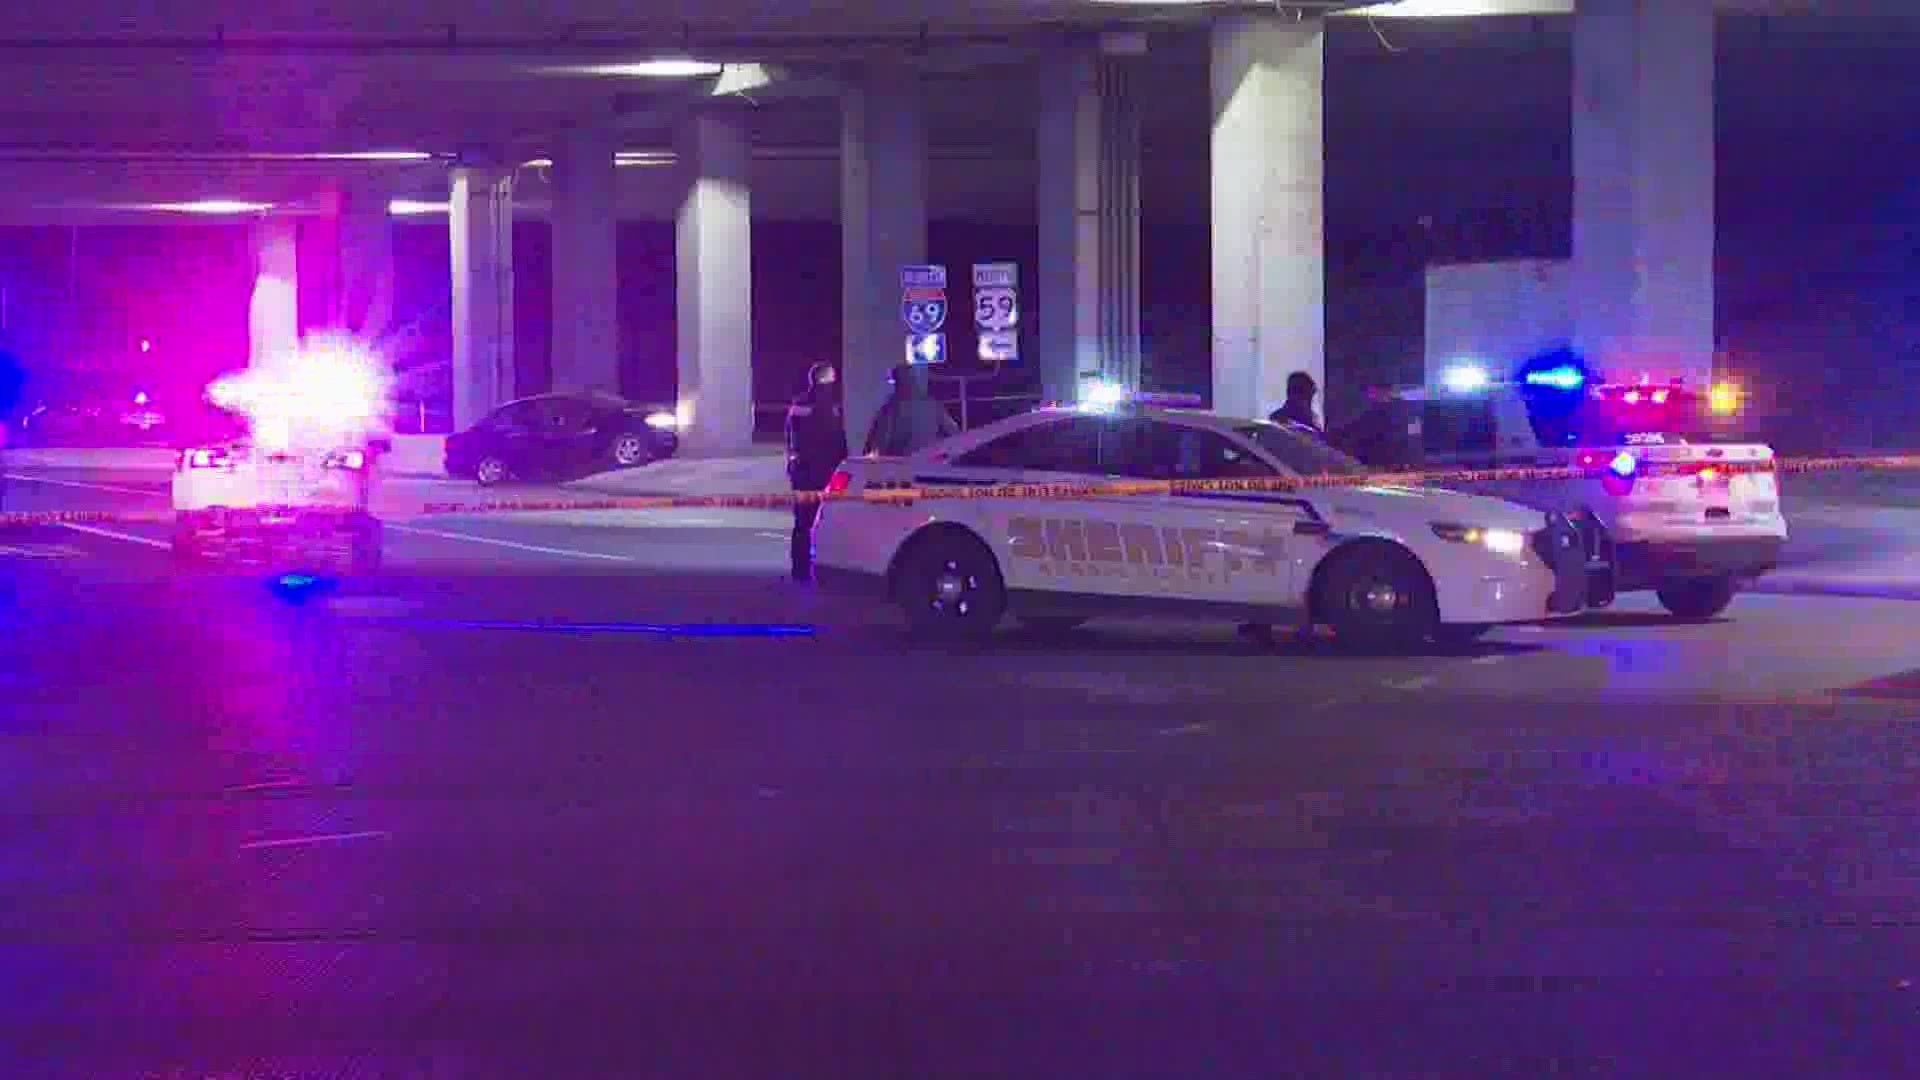 A man was found shot to death inside his car under the Eastex Freeway near Aldine Bender. Deputies believe the man was shot by someone driving a red Mustang.